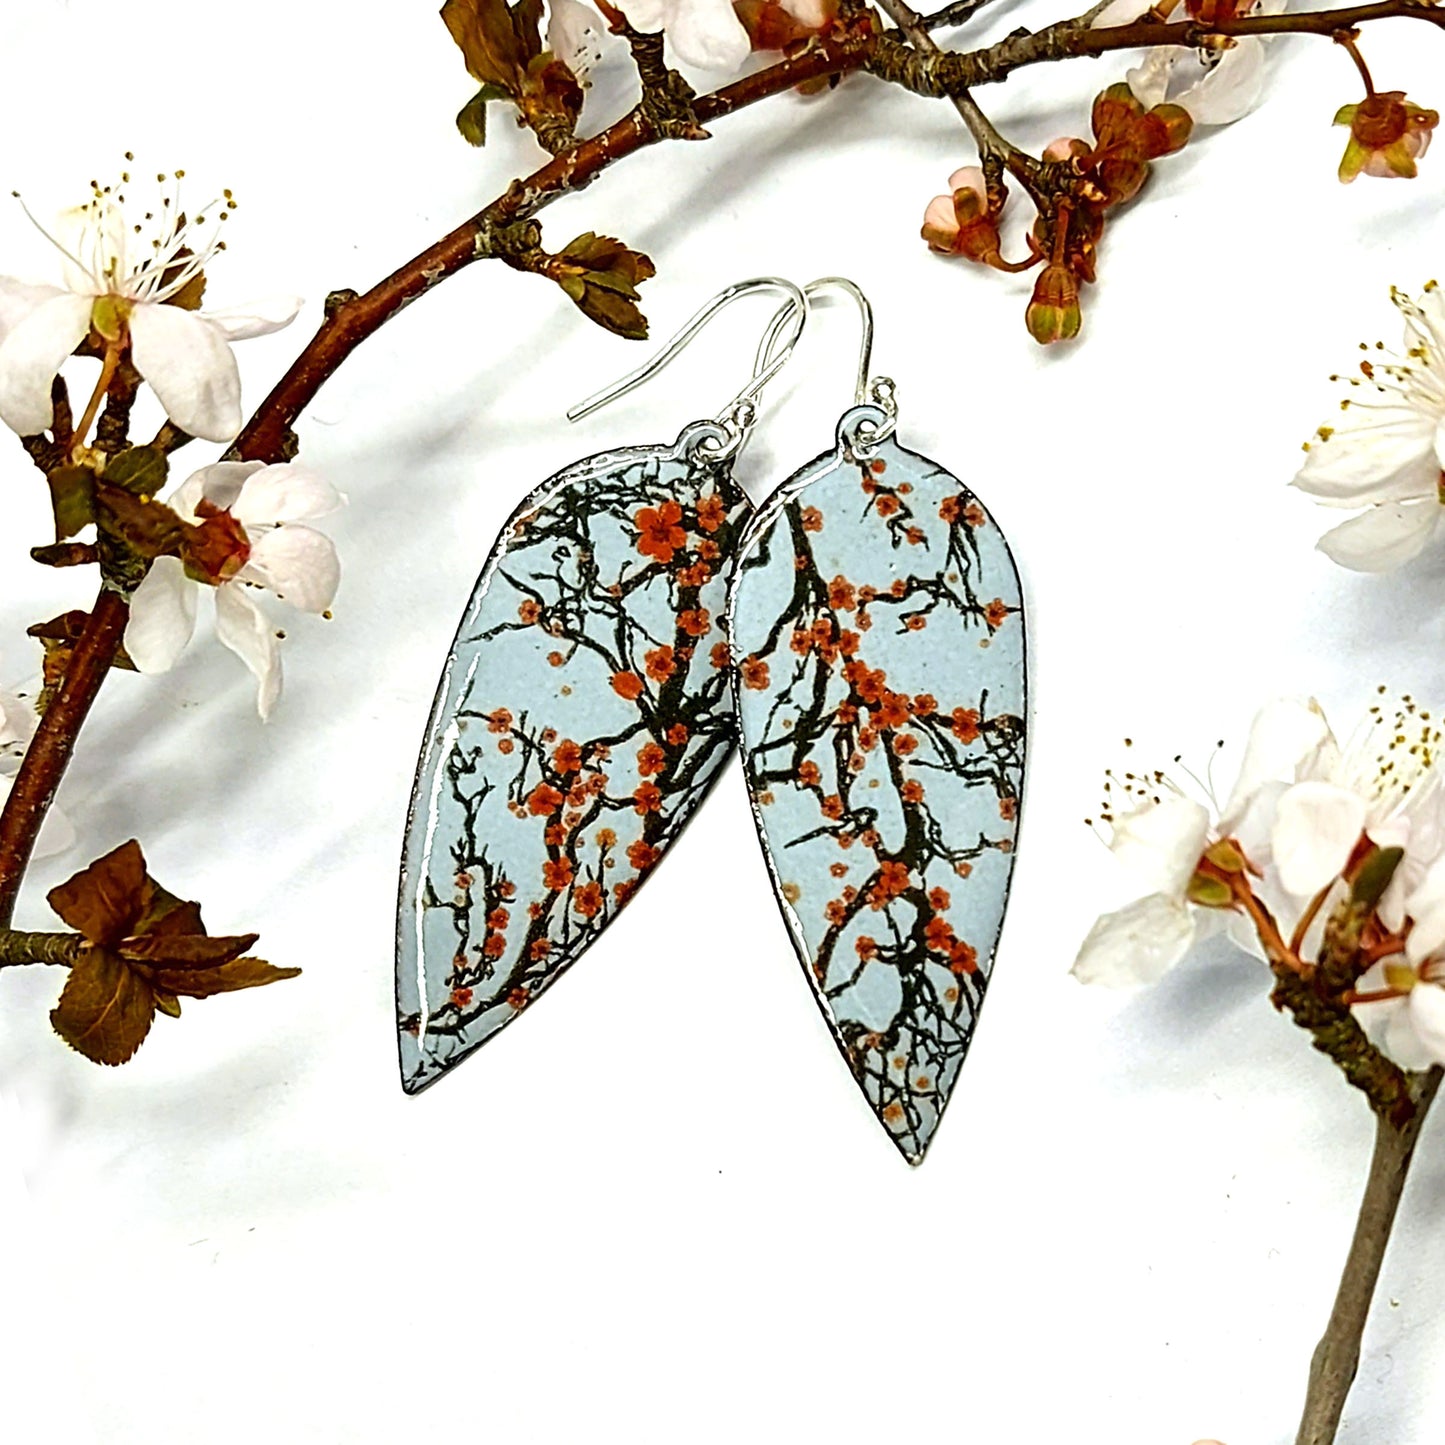 Statement enamel earrings featuring branches and red cherry blossom. On silver ear hooks. Surrounded by white cherry blossom branches.